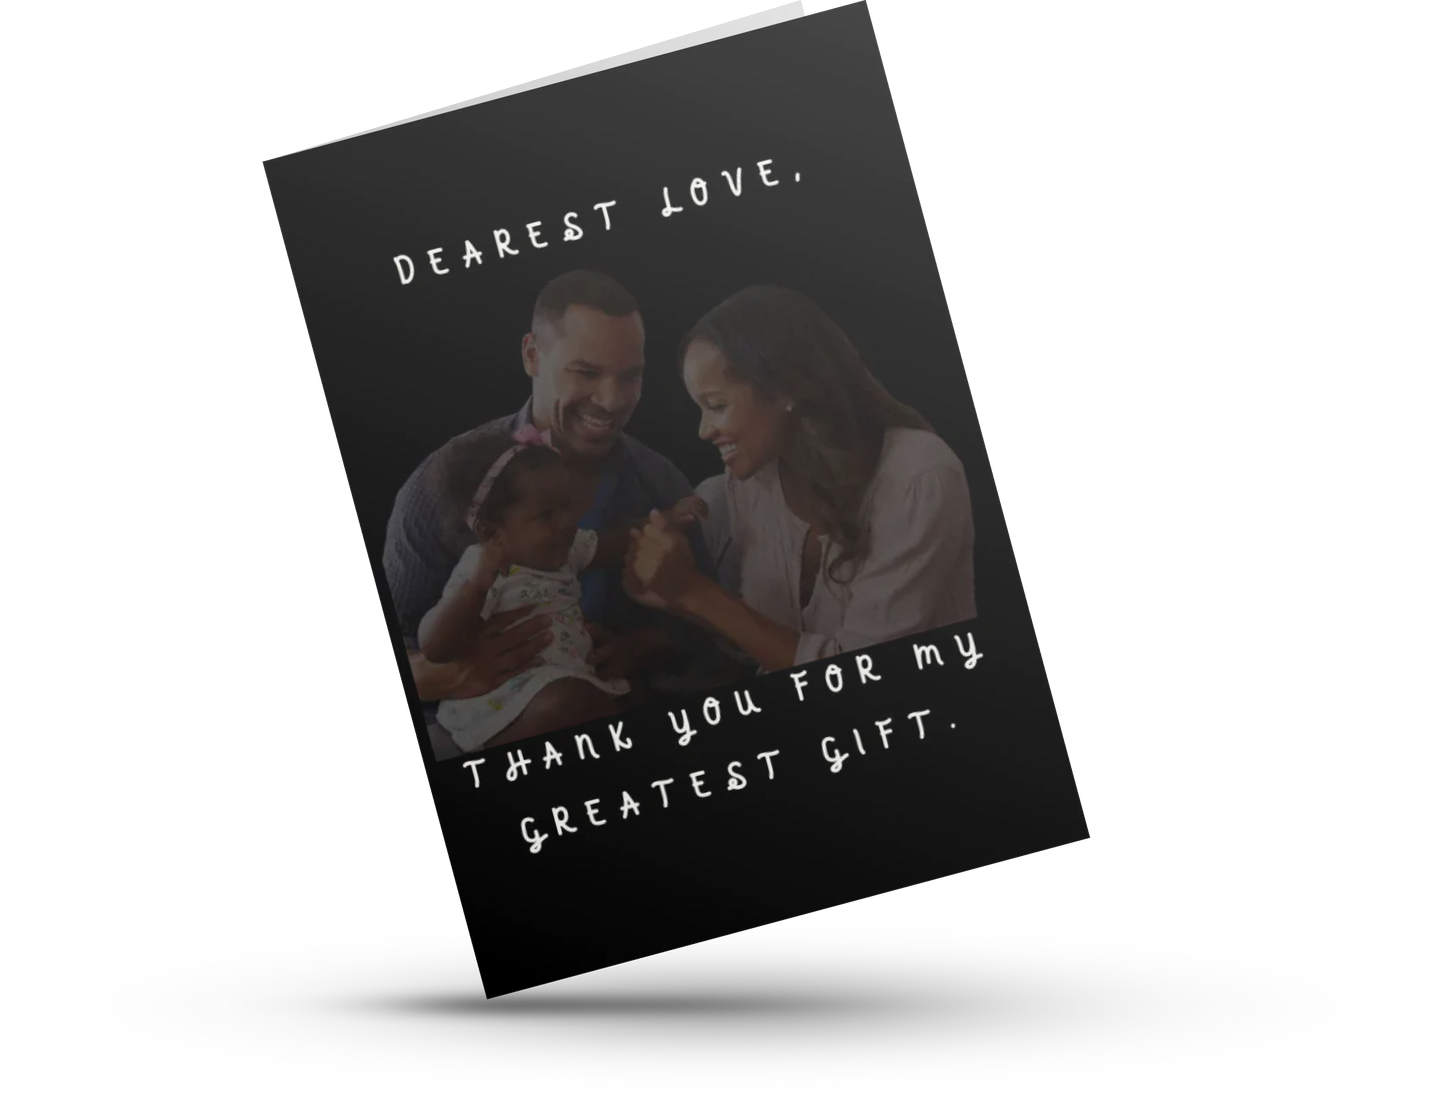 Dearest Love, Thank you - Lyfe Every Day Greeting Card Collection